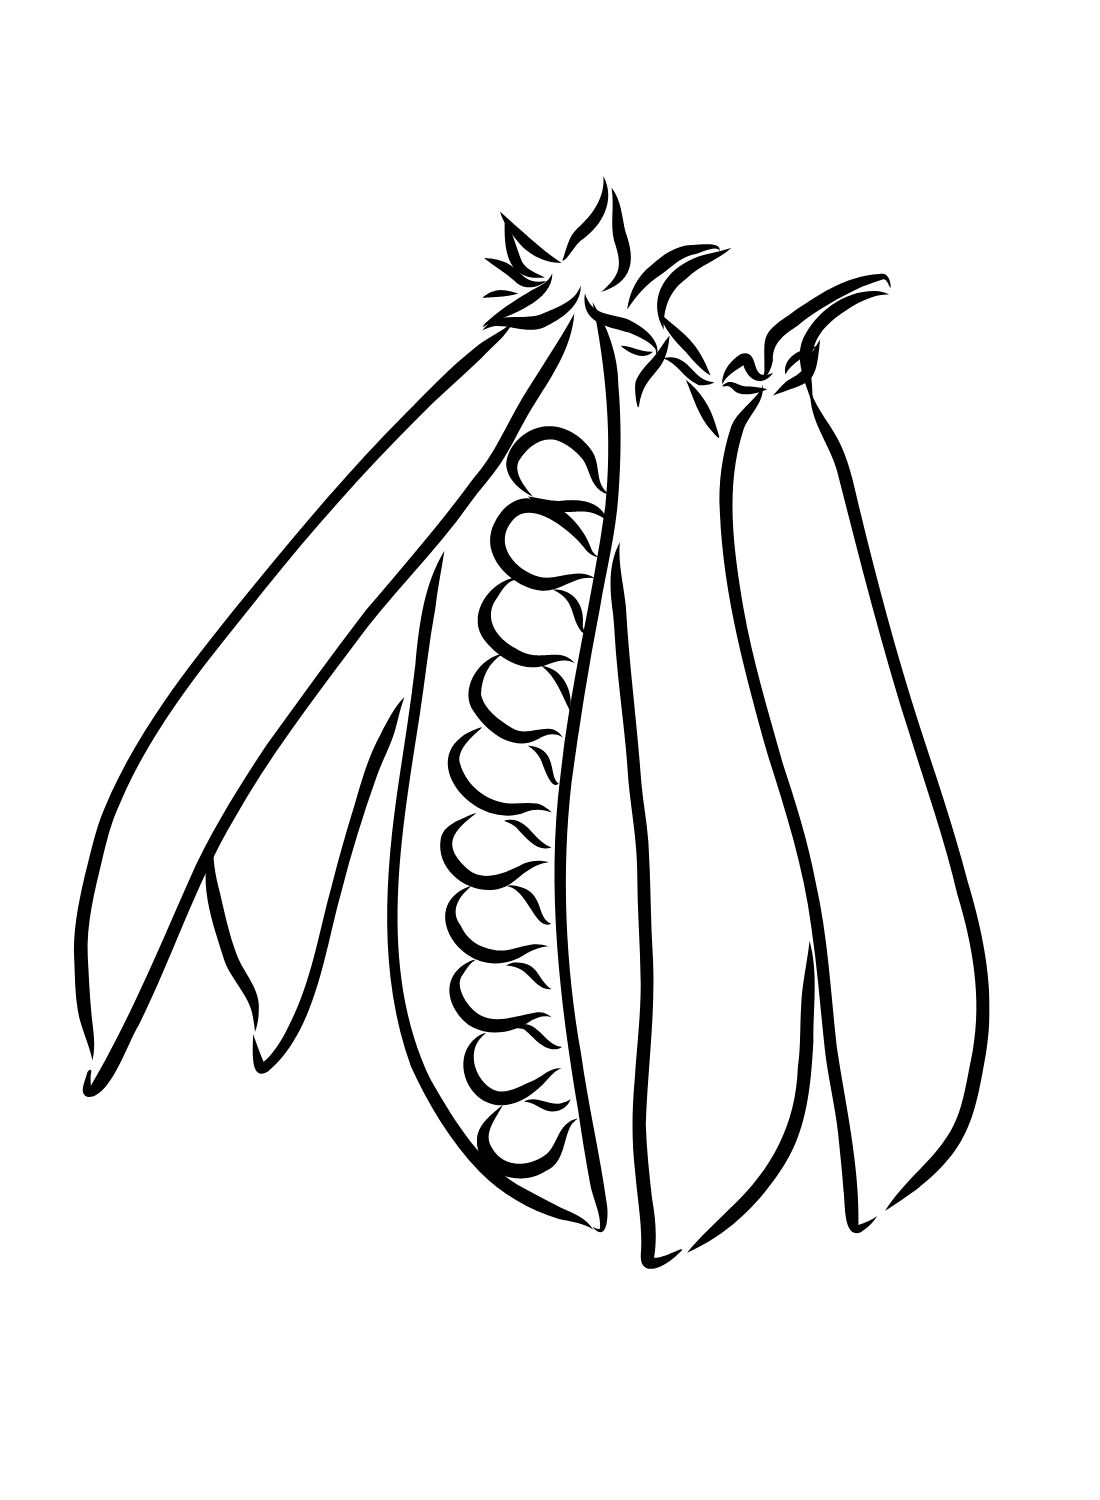 Beans coloring pages printable for free download